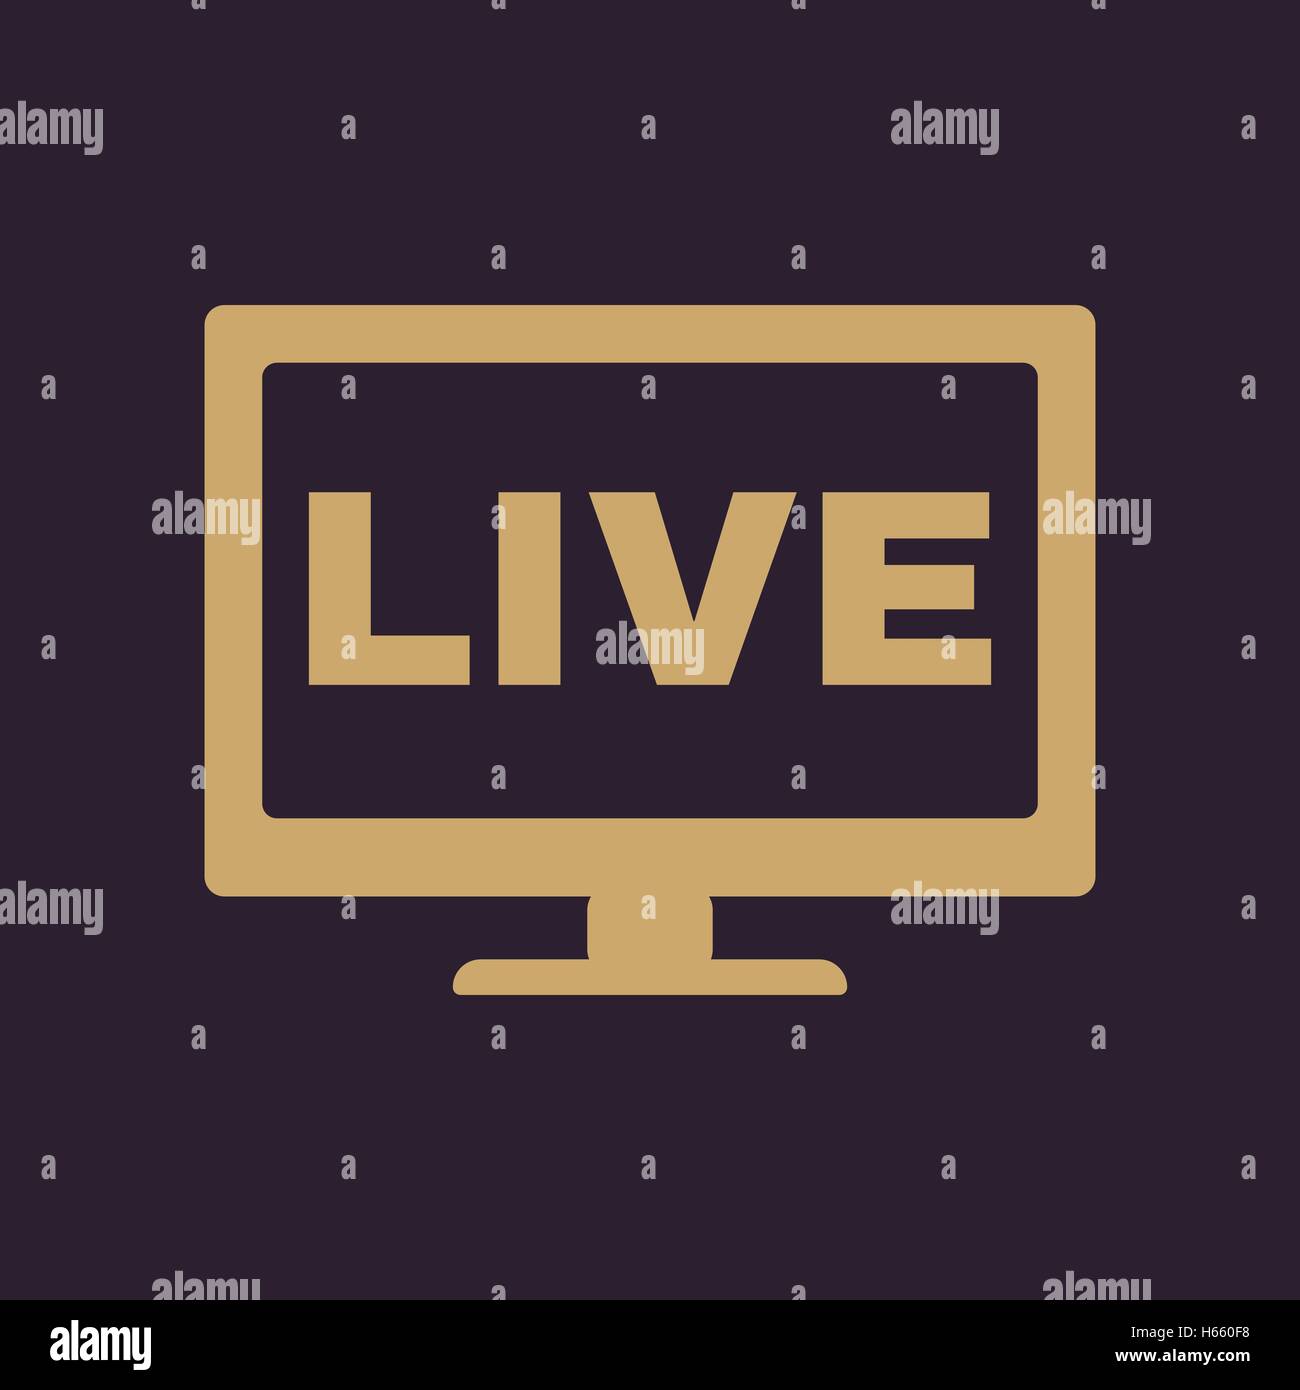 The live tv icon. Broadcasting and broadcast symbol. Flat Stock Vector